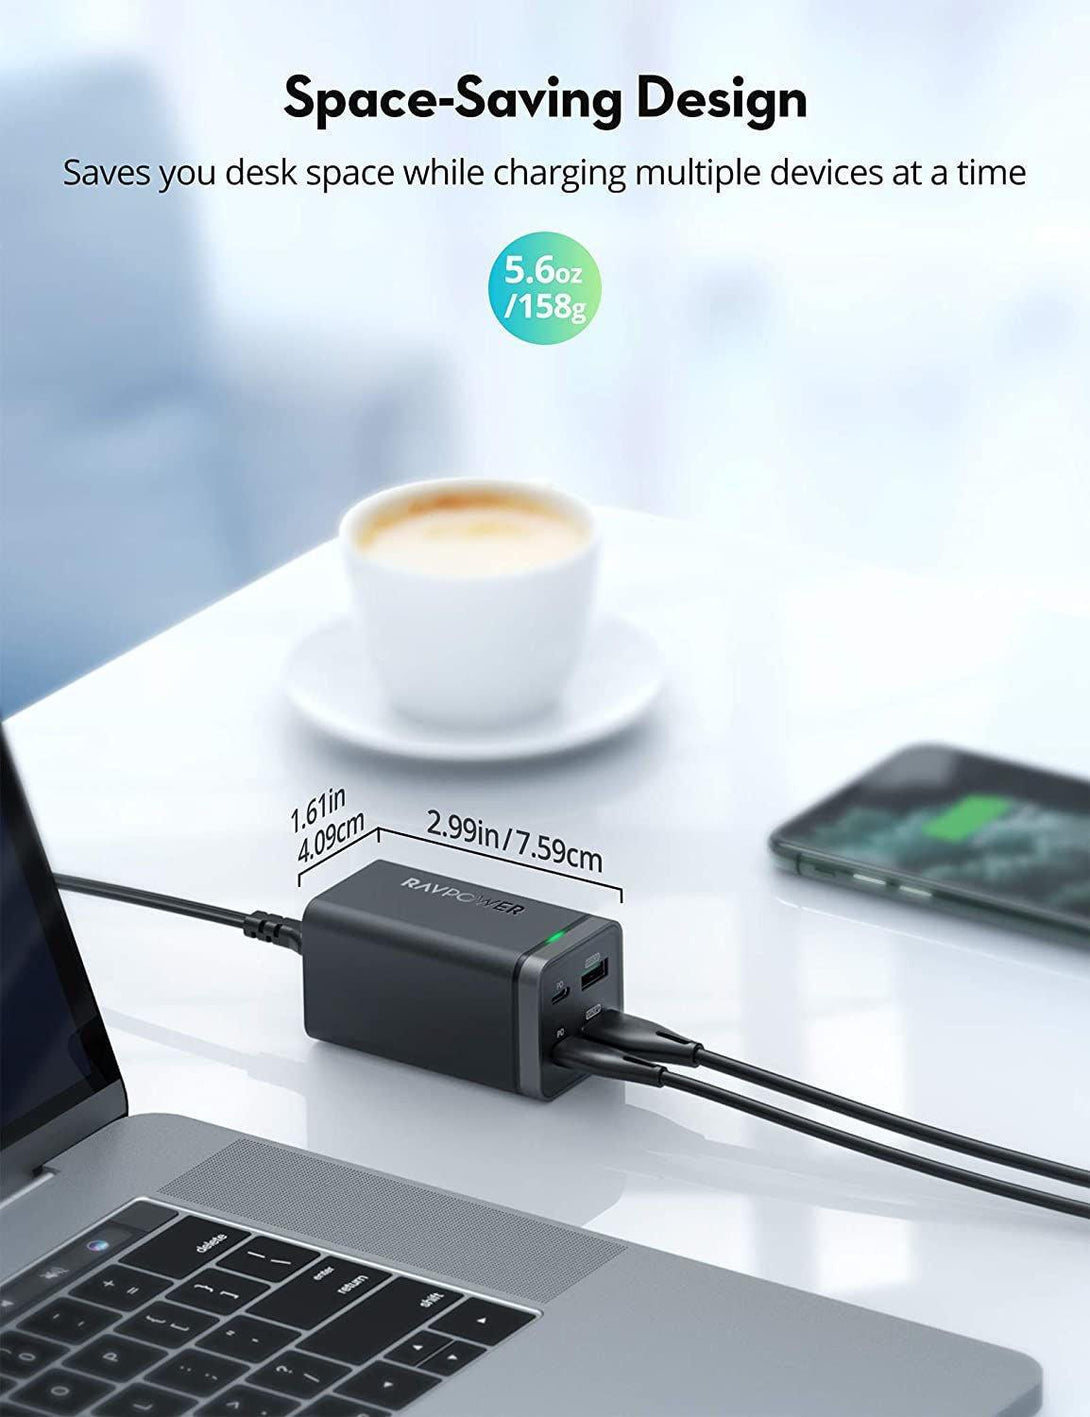 RAVpower PD Pioneer 65W 4-Port USB Charger - Black - Tech Goods